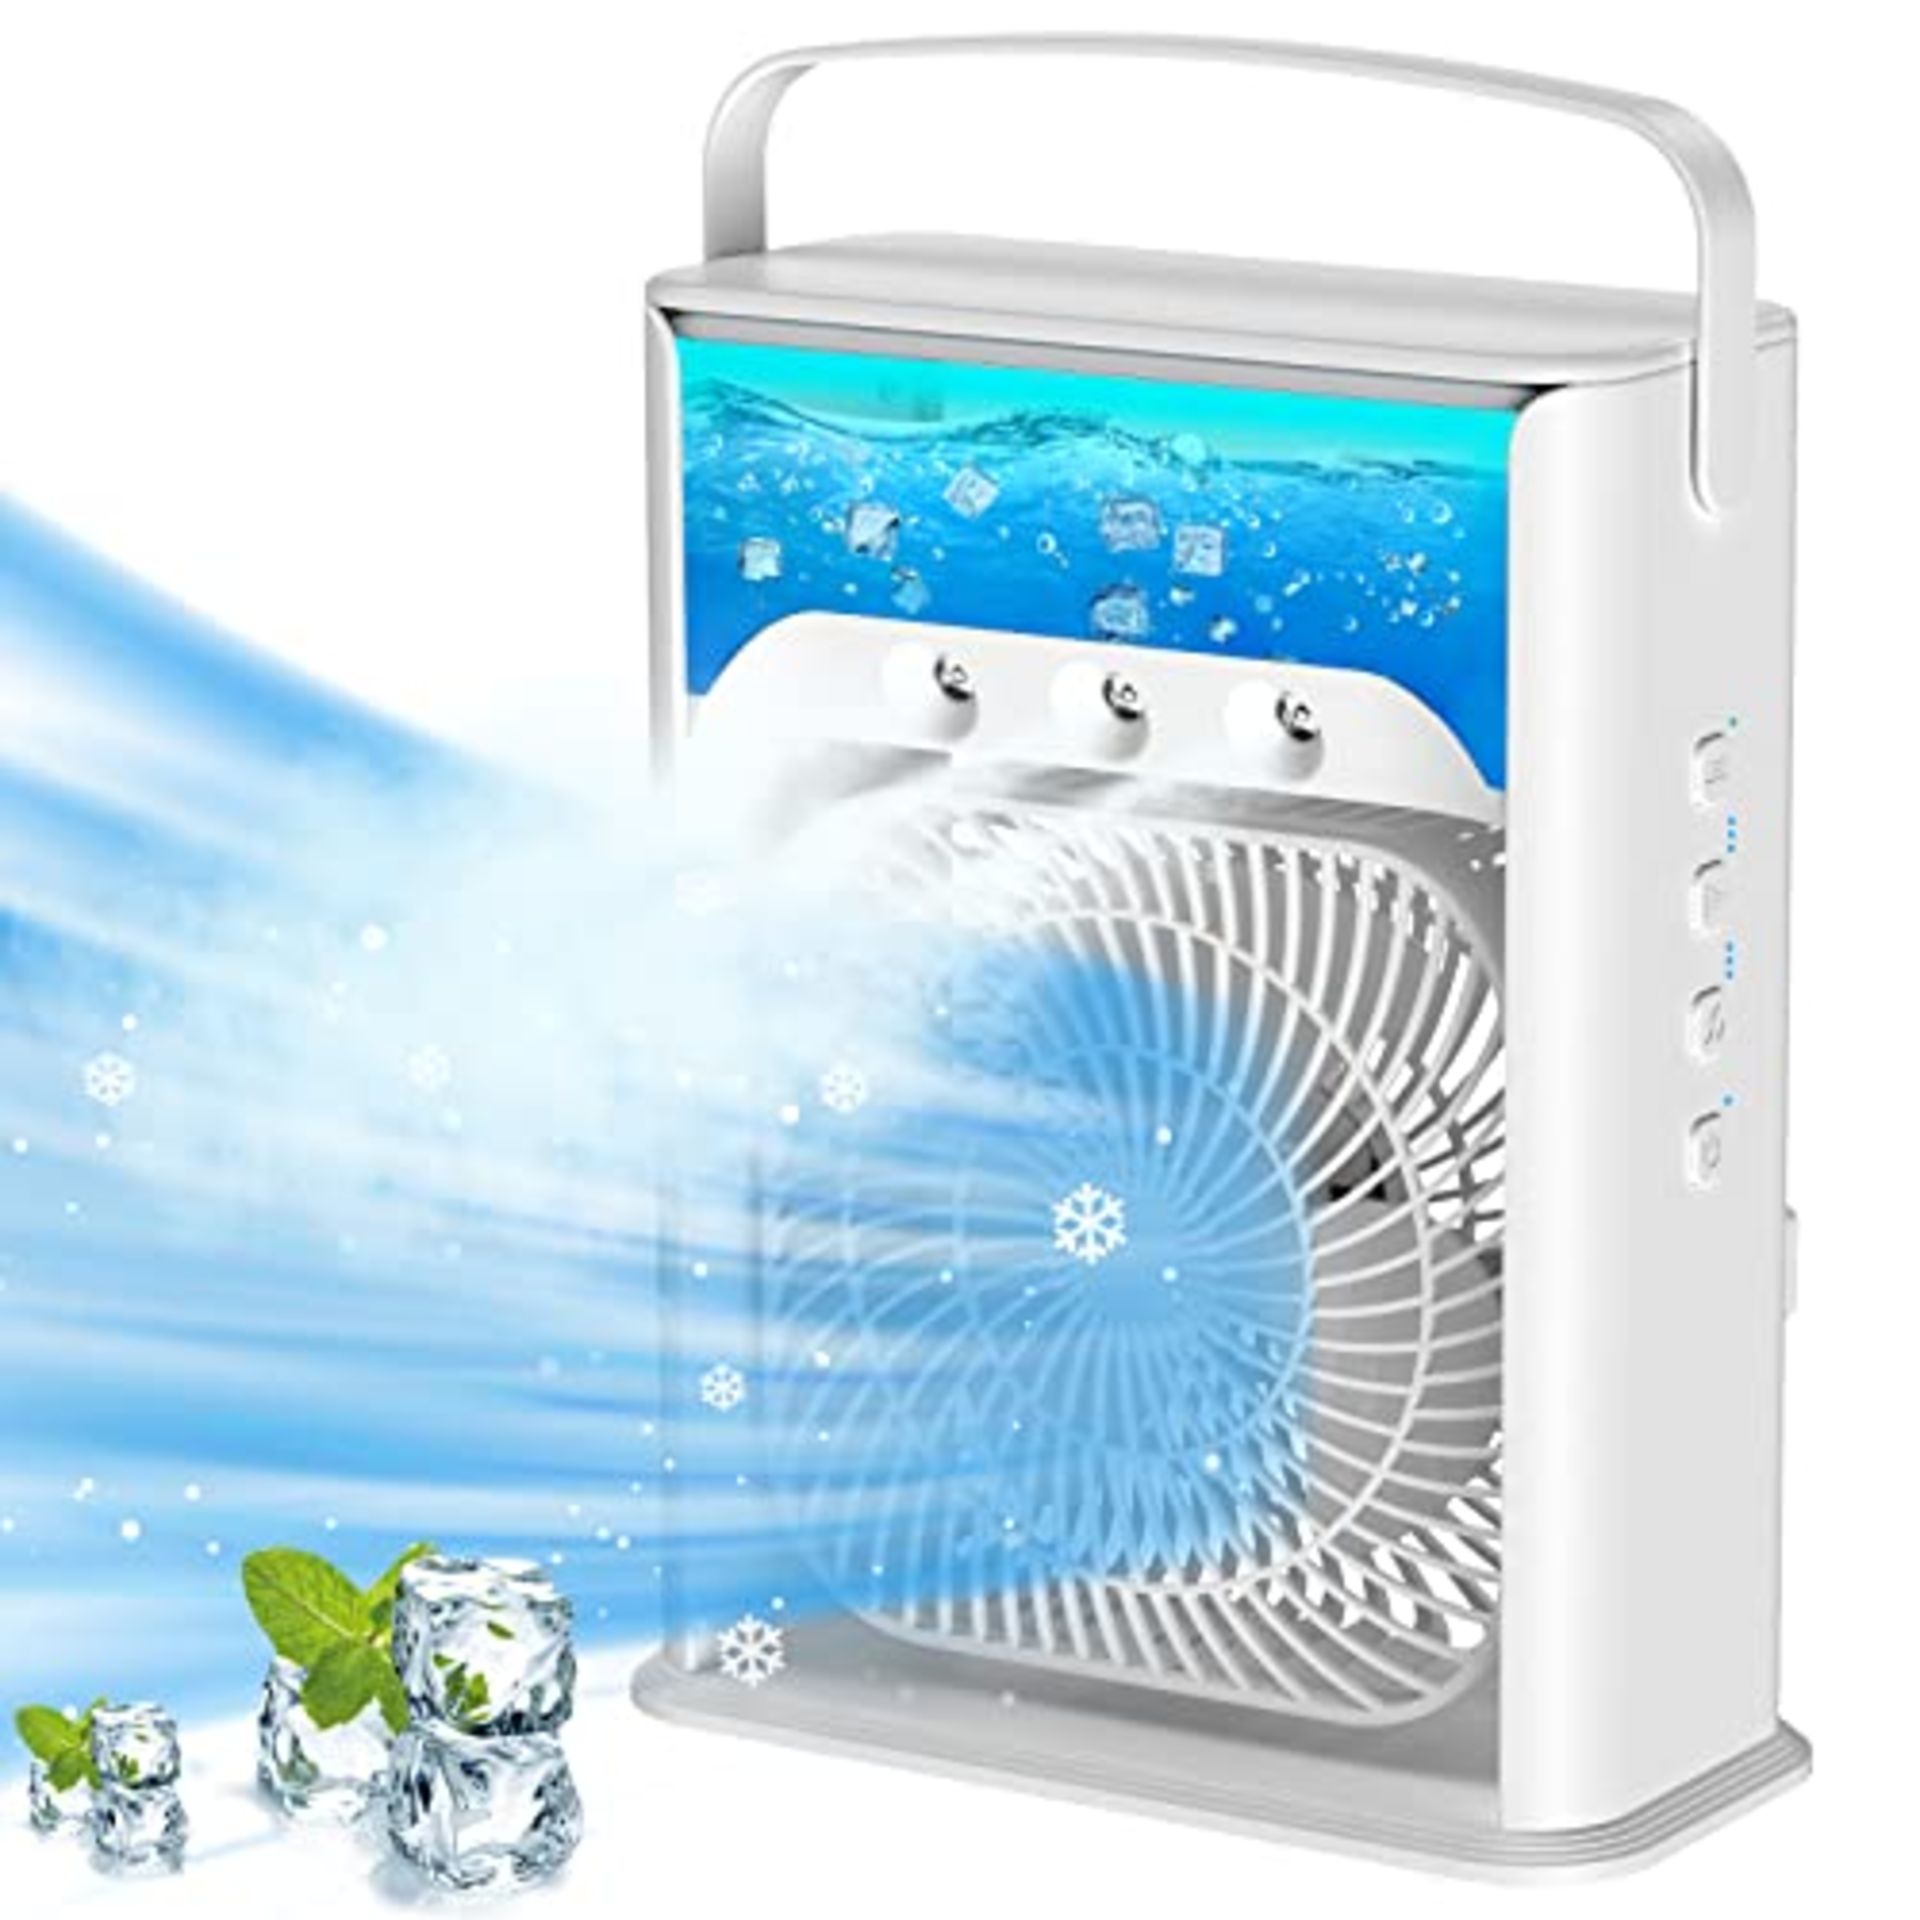 Portable Air Cooler 4-In-1 Mini Mobile Air Conditioner Fan, Air Cooling Fan and Humidi